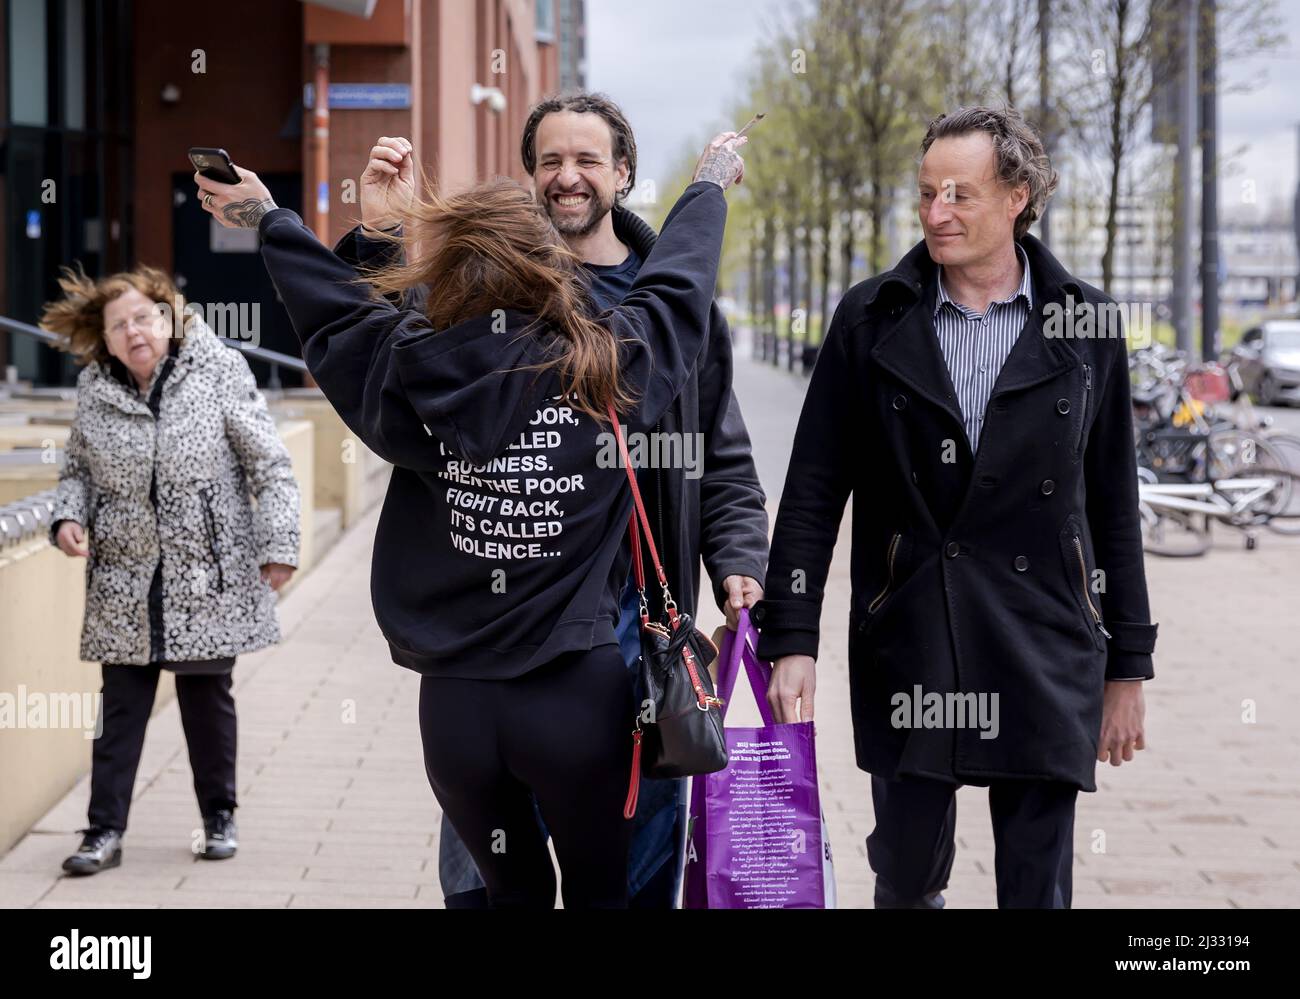 2022-04-05 14:30:05 ROTTERDAM - Willem Engel is welcomed by his girlfriend Dorien Rose when he leaves the court together with Jeroen Pols, the lawyer of Viruswaarheid, after his remand has been lifted. The foreman of Viruswaarheid was arrested again on April 3, after various media outlets published a conversation with Engel recorded in the studio of Café Weltschmerz. Engel's pre-trial detention was suspended on the condition that he would not make any statements on social media. ANP ROBIN VAN LONKHUIJSEN netherlands out - belgium out Stock Photo